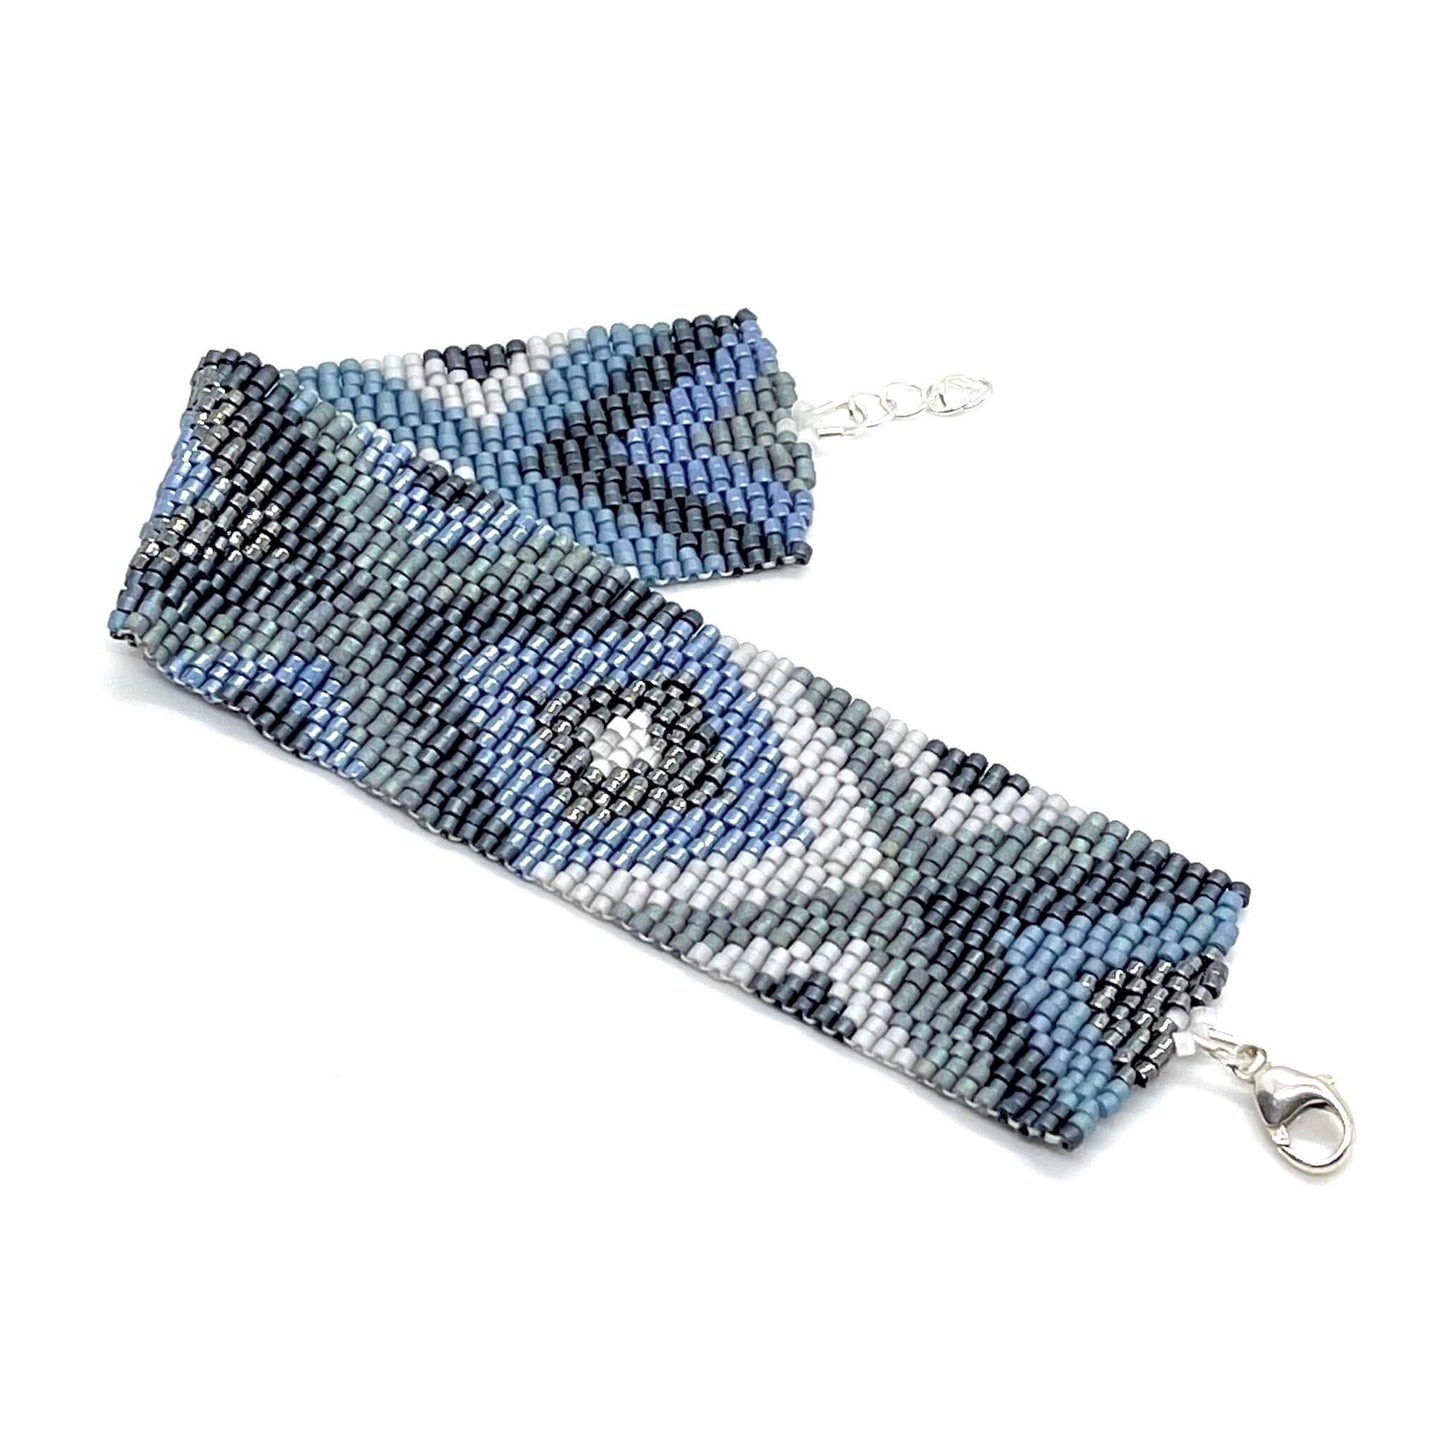 Blue, gray, and silver, wide seed bead bracelet cuff with a modern Xs and diamonds geometric pattern.